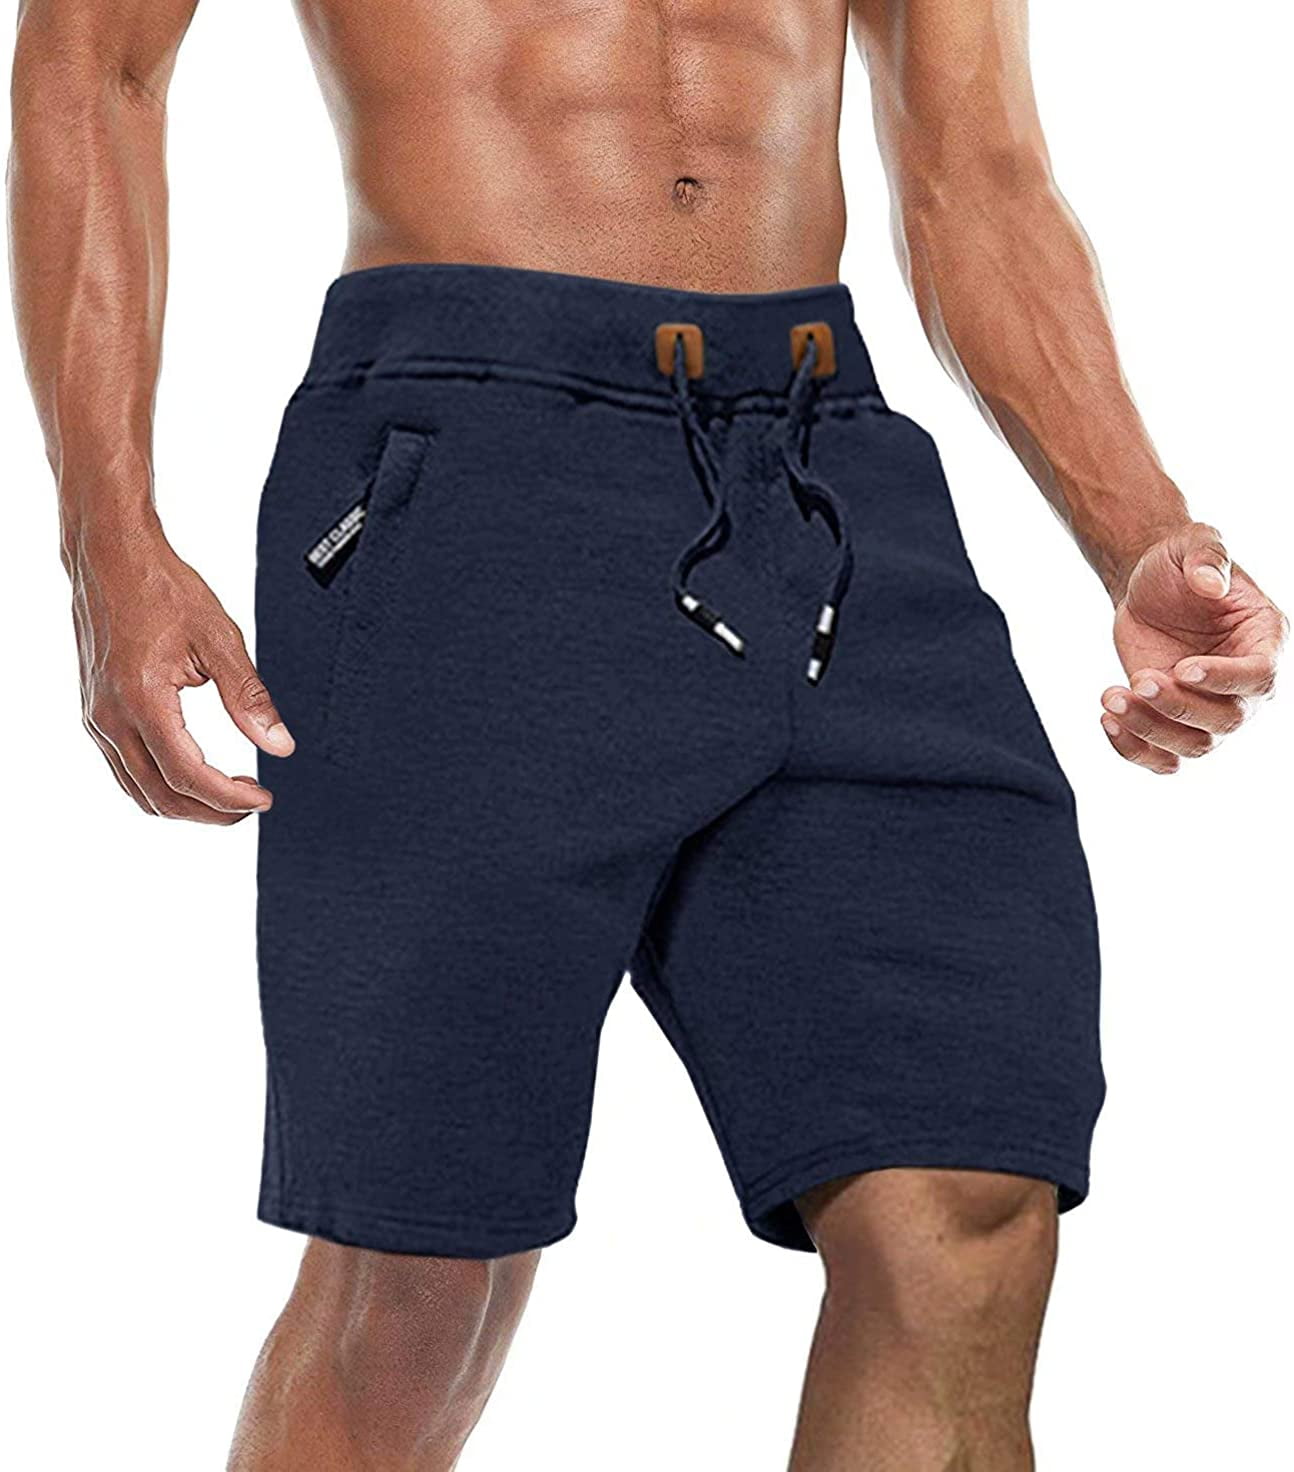 CRYSULLY Men's Cotton Joggers Casual Workout Shorts Running Shorts with Zipper Pockets 